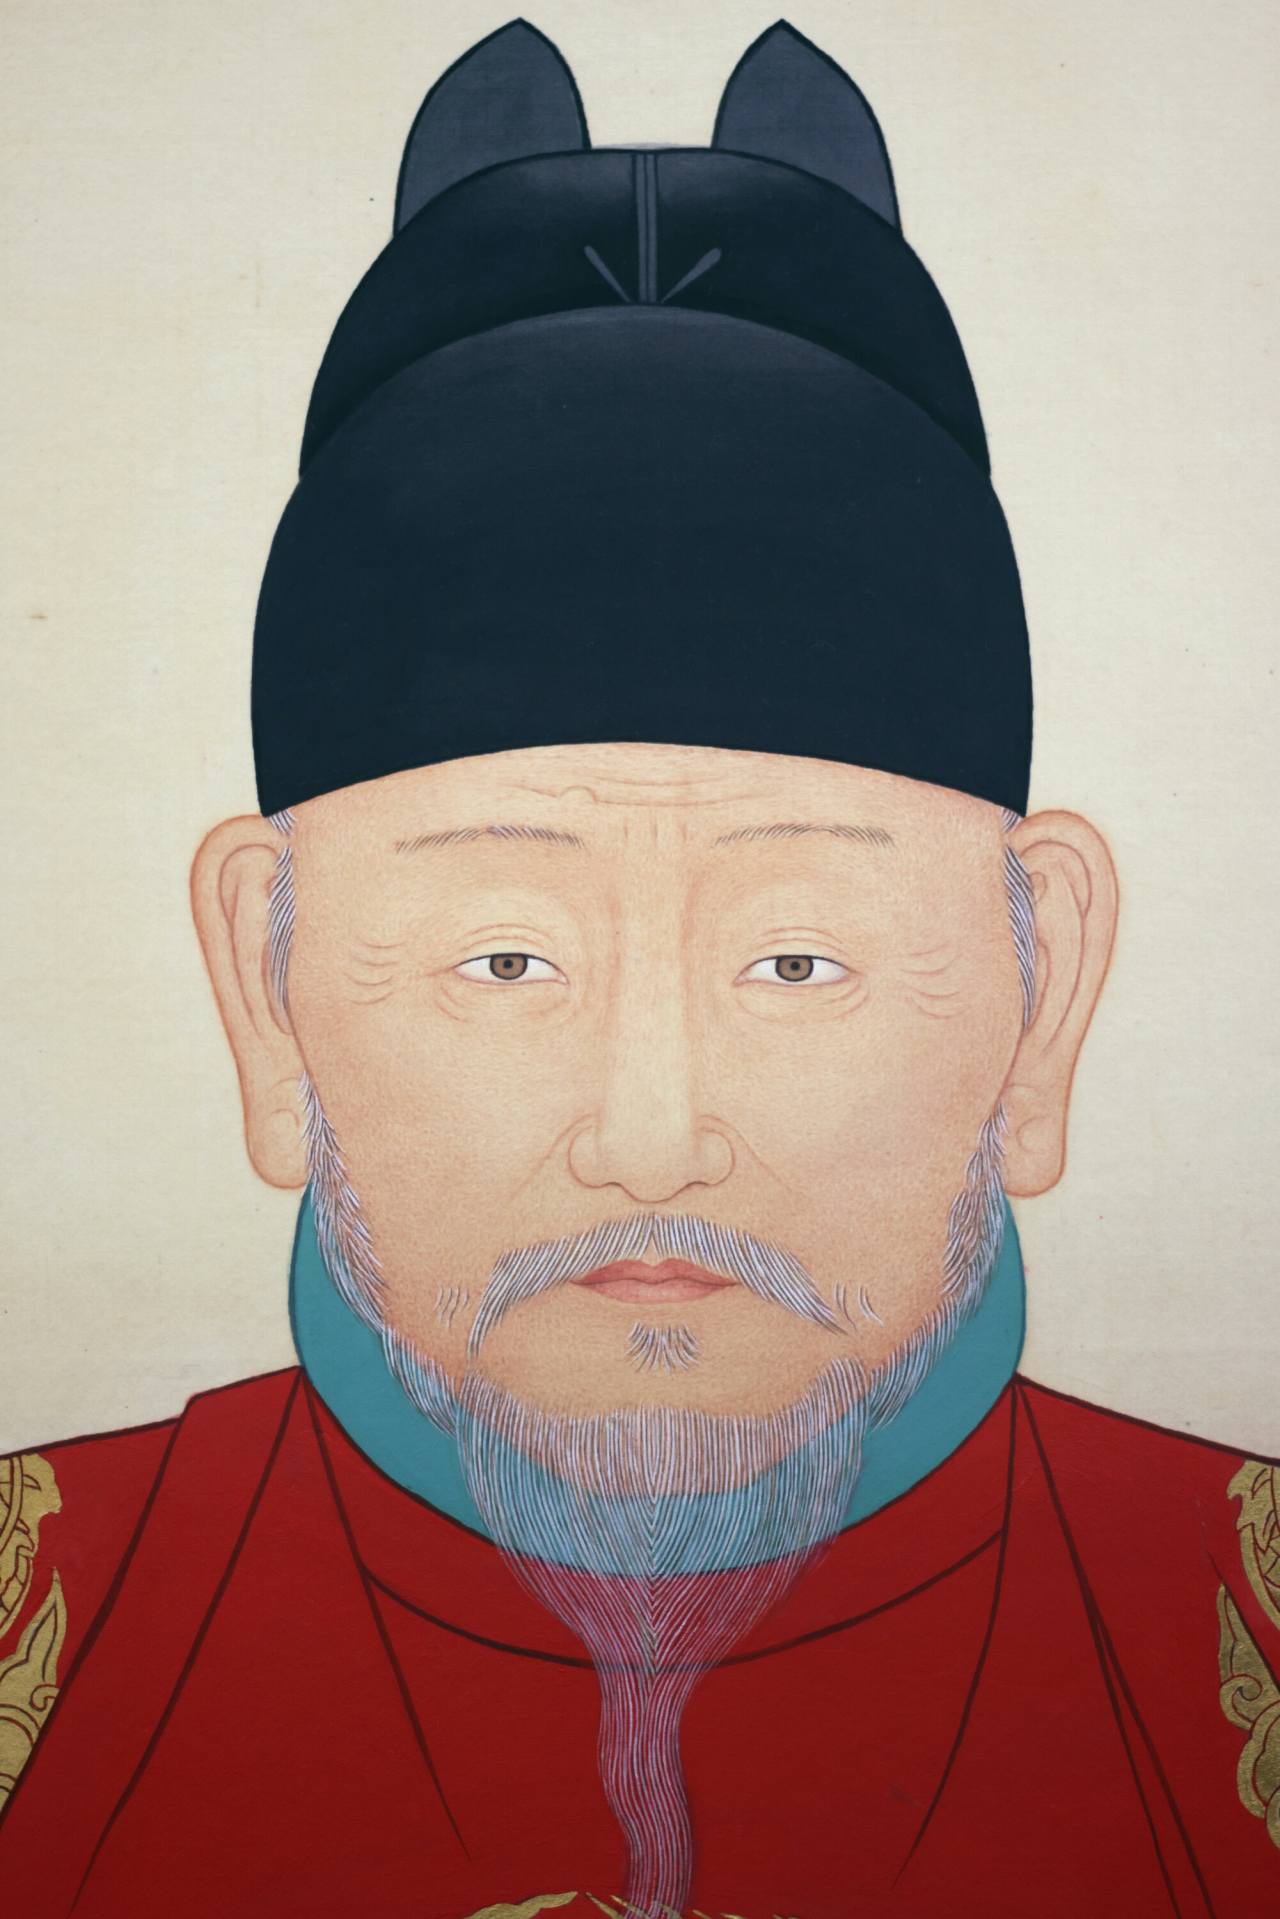 An official portrait of Yi Seong-gye, the founder of Joseon, at an advanced age, is on display at the Royal Portrait Gallery in Jeonju, Korea. (Hyungwon Kang)